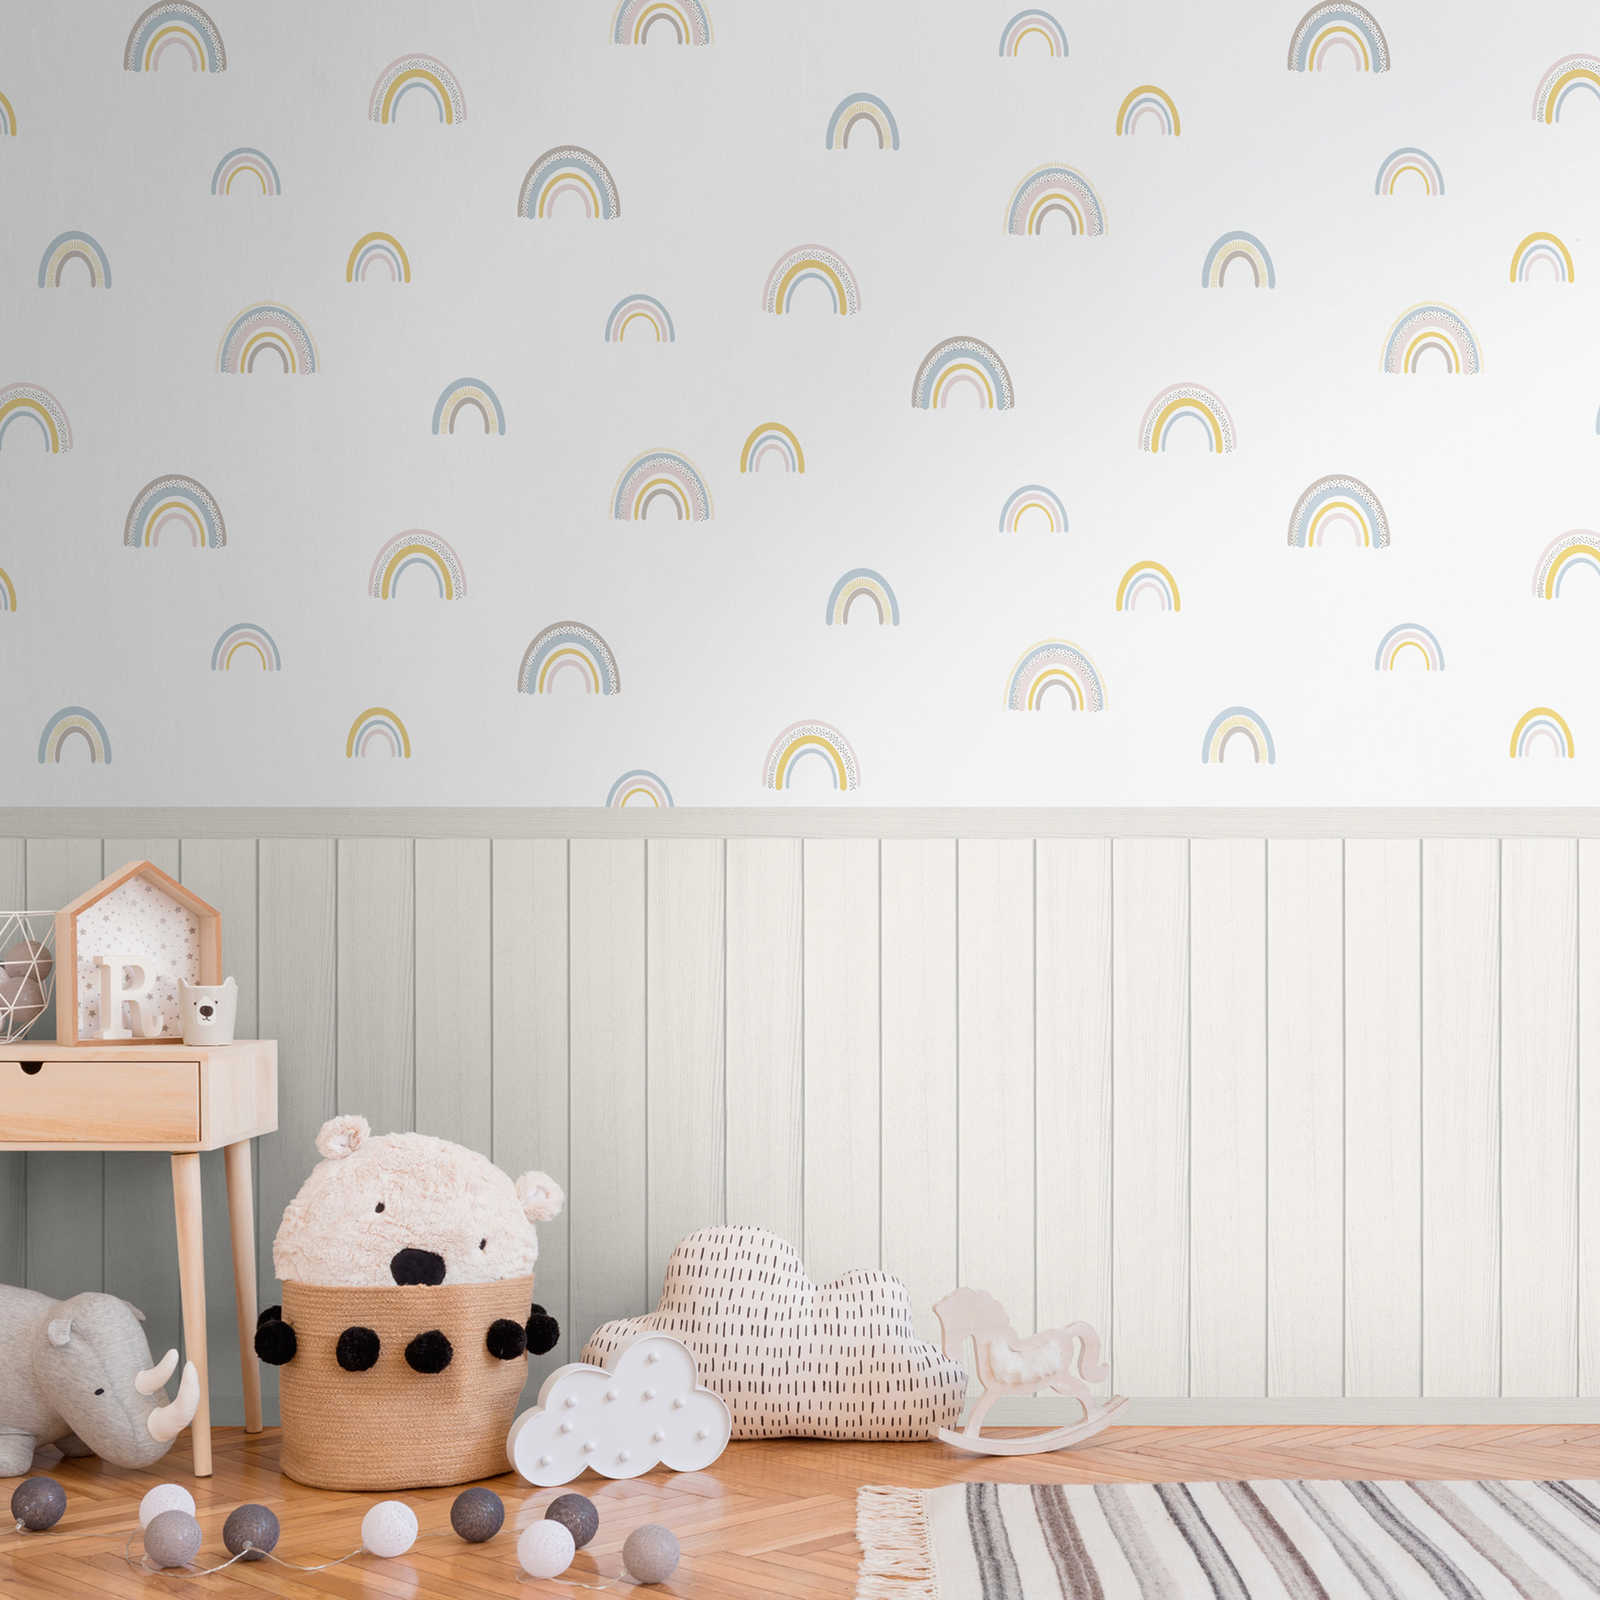 Non-woven motif wallpaper with wood-effect plinth border and rainbow pattern - white, grey, colourful
